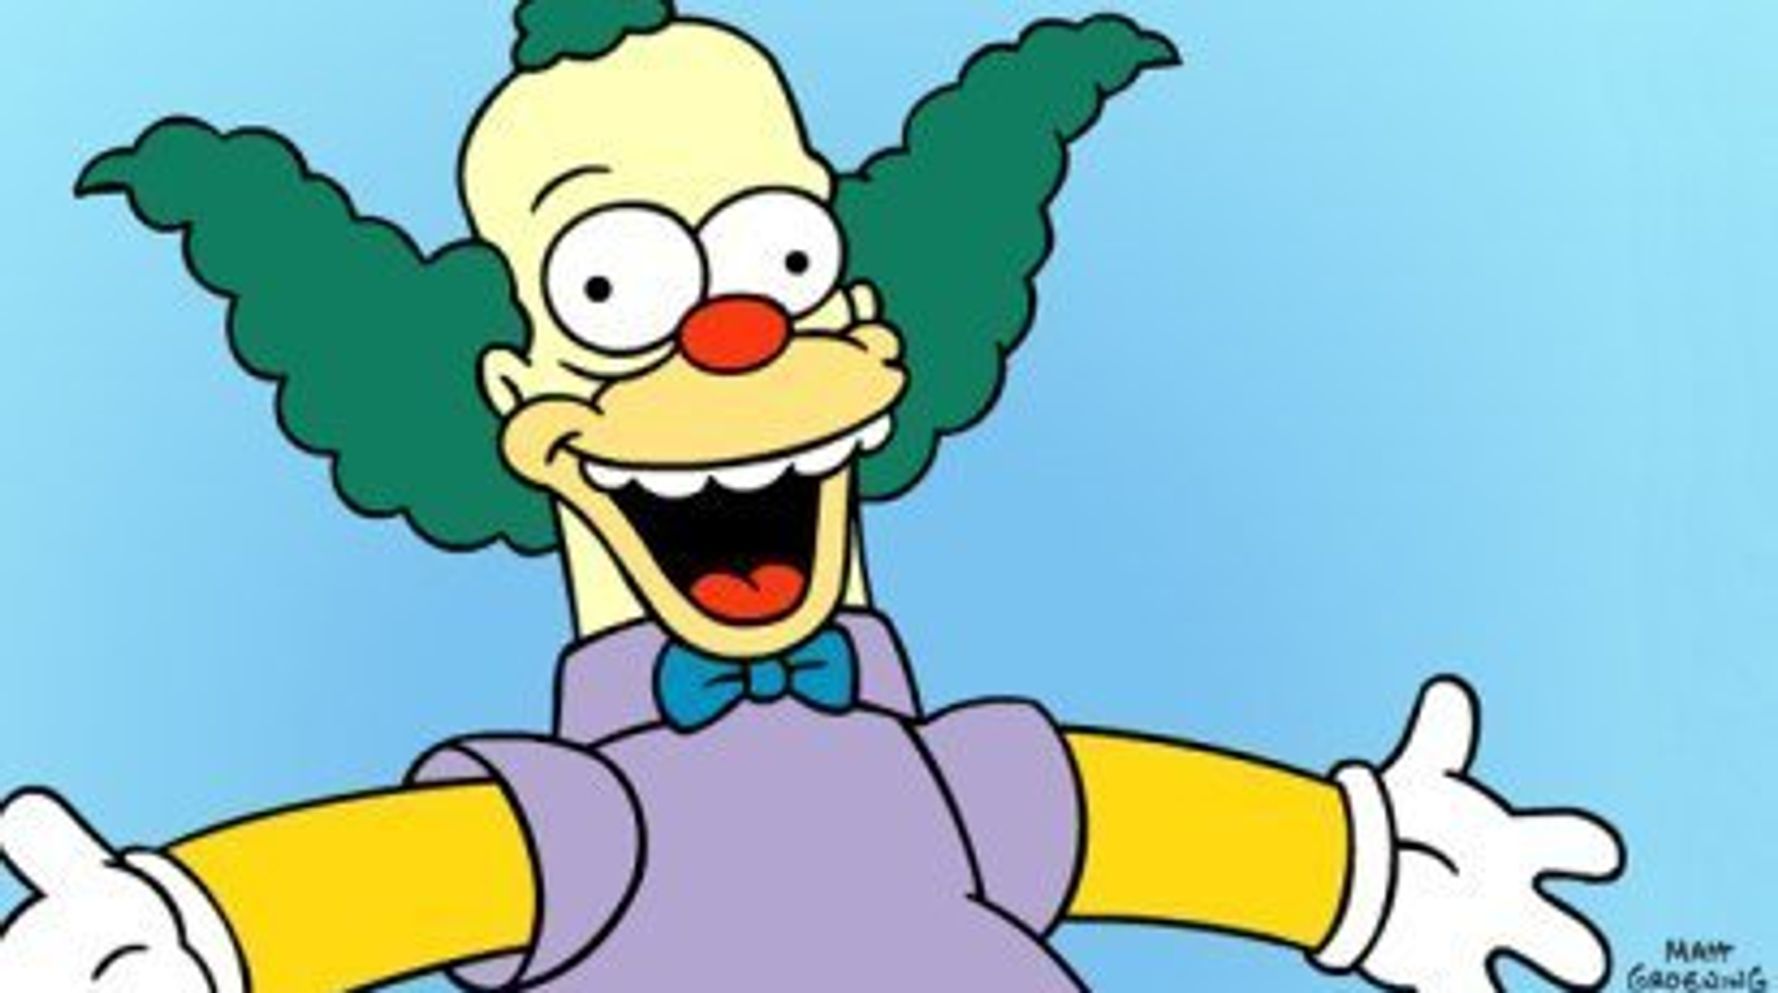 Krusty The Clown May Laugh His Final Laugh.